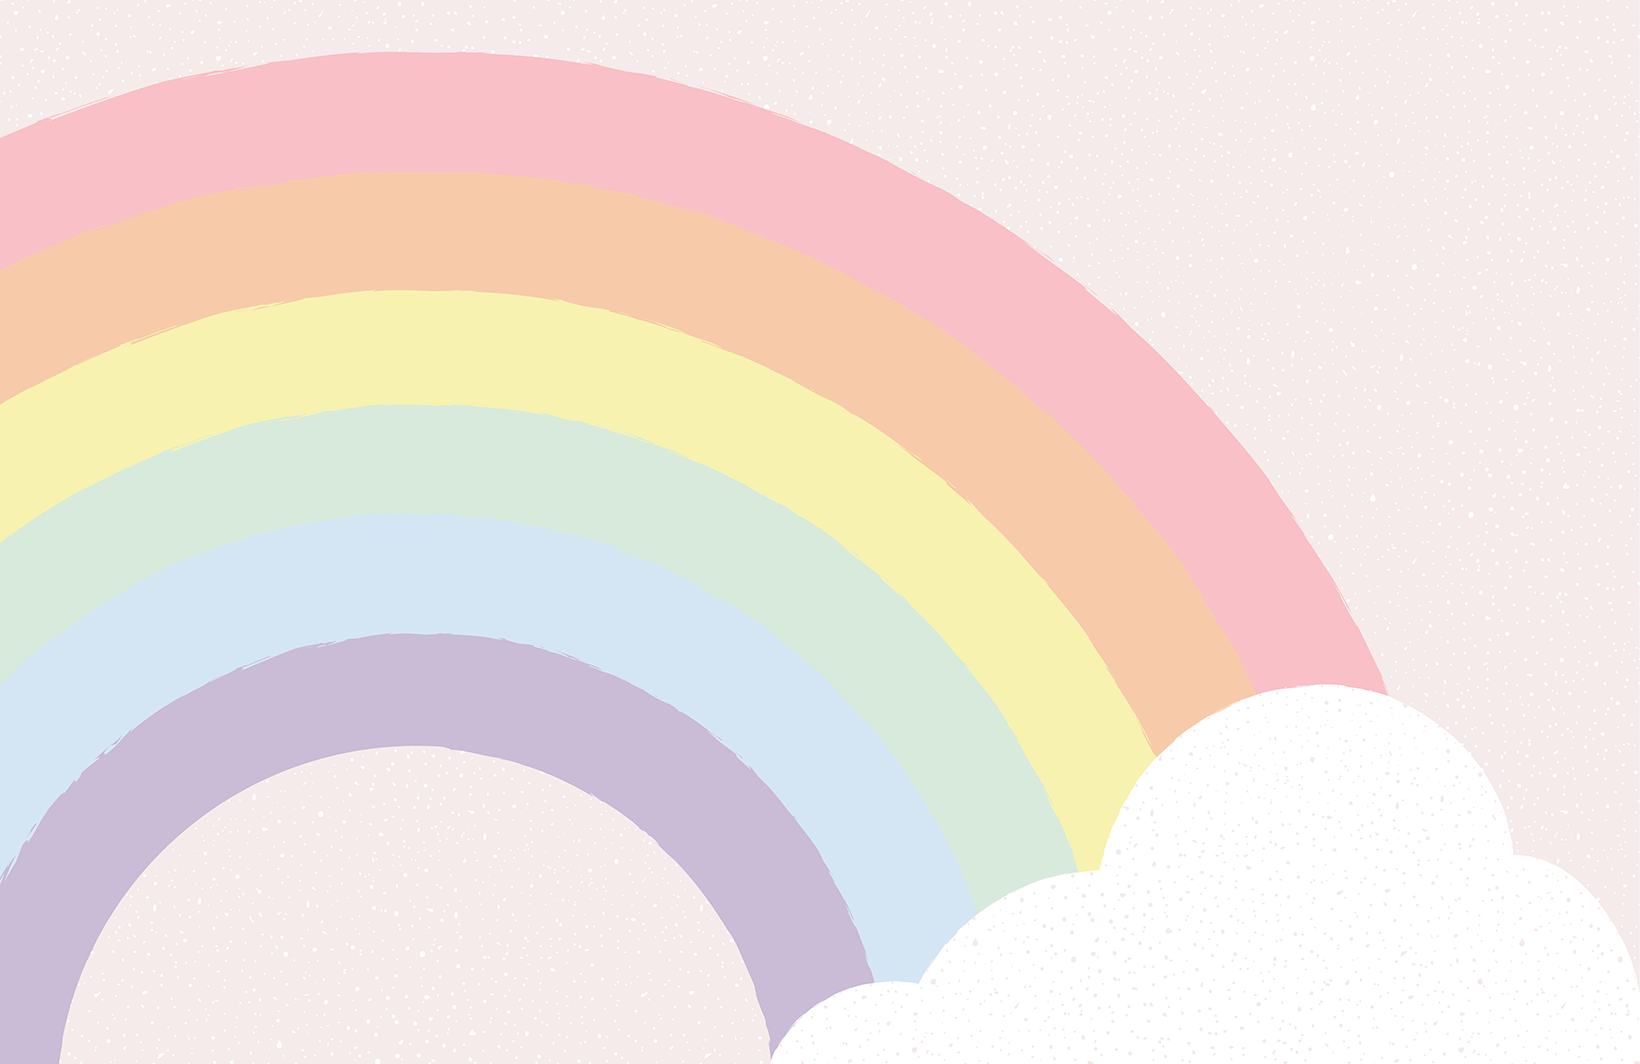 Aesthetic Pastel Rainbow Wallpaper Gifts & Merchandise for Sale | Redbubble